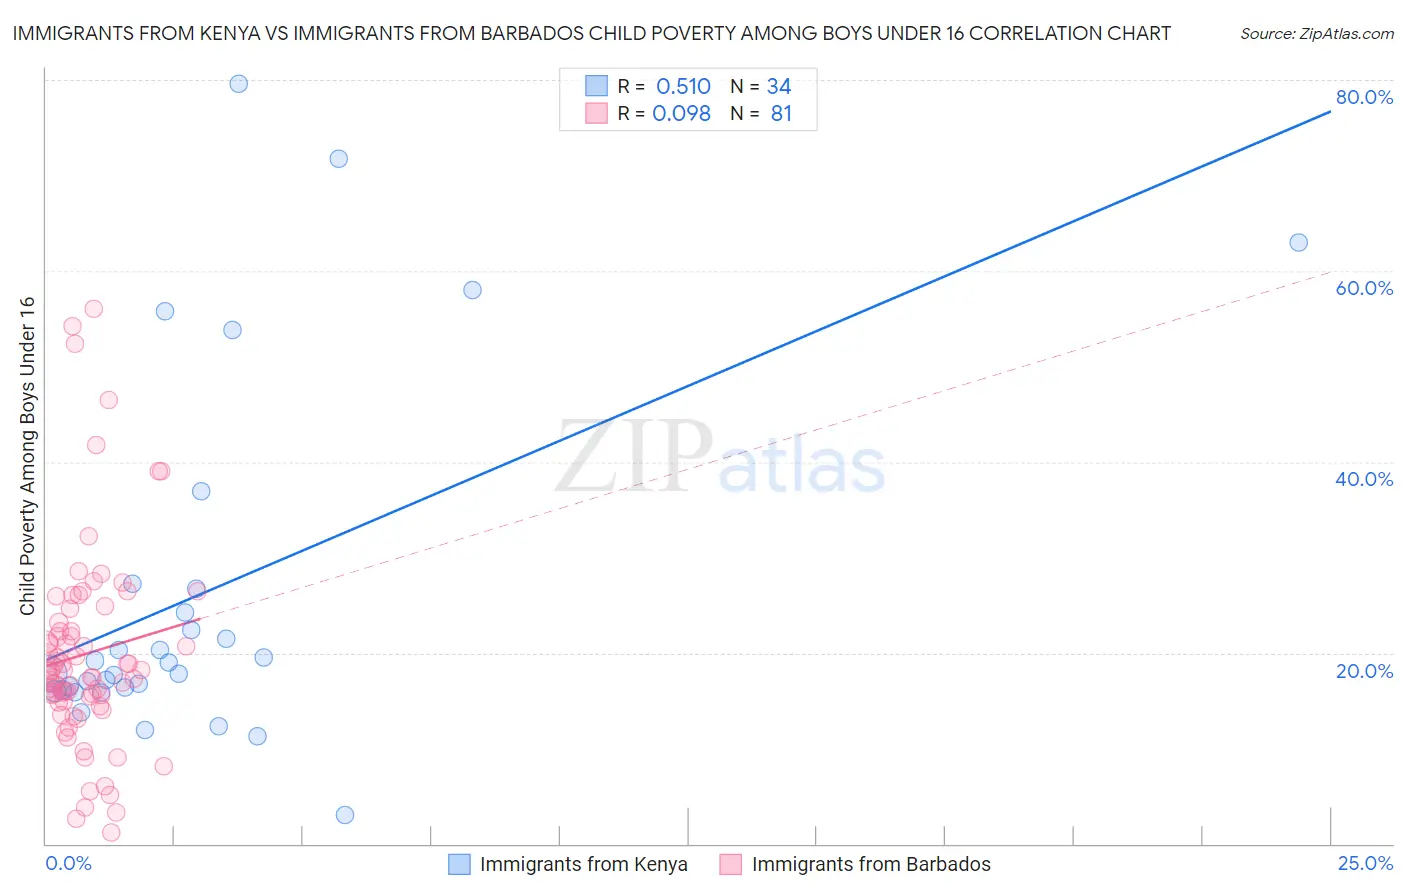 Immigrants from Kenya vs Immigrants from Barbados Child Poverty Among Boys Under 16